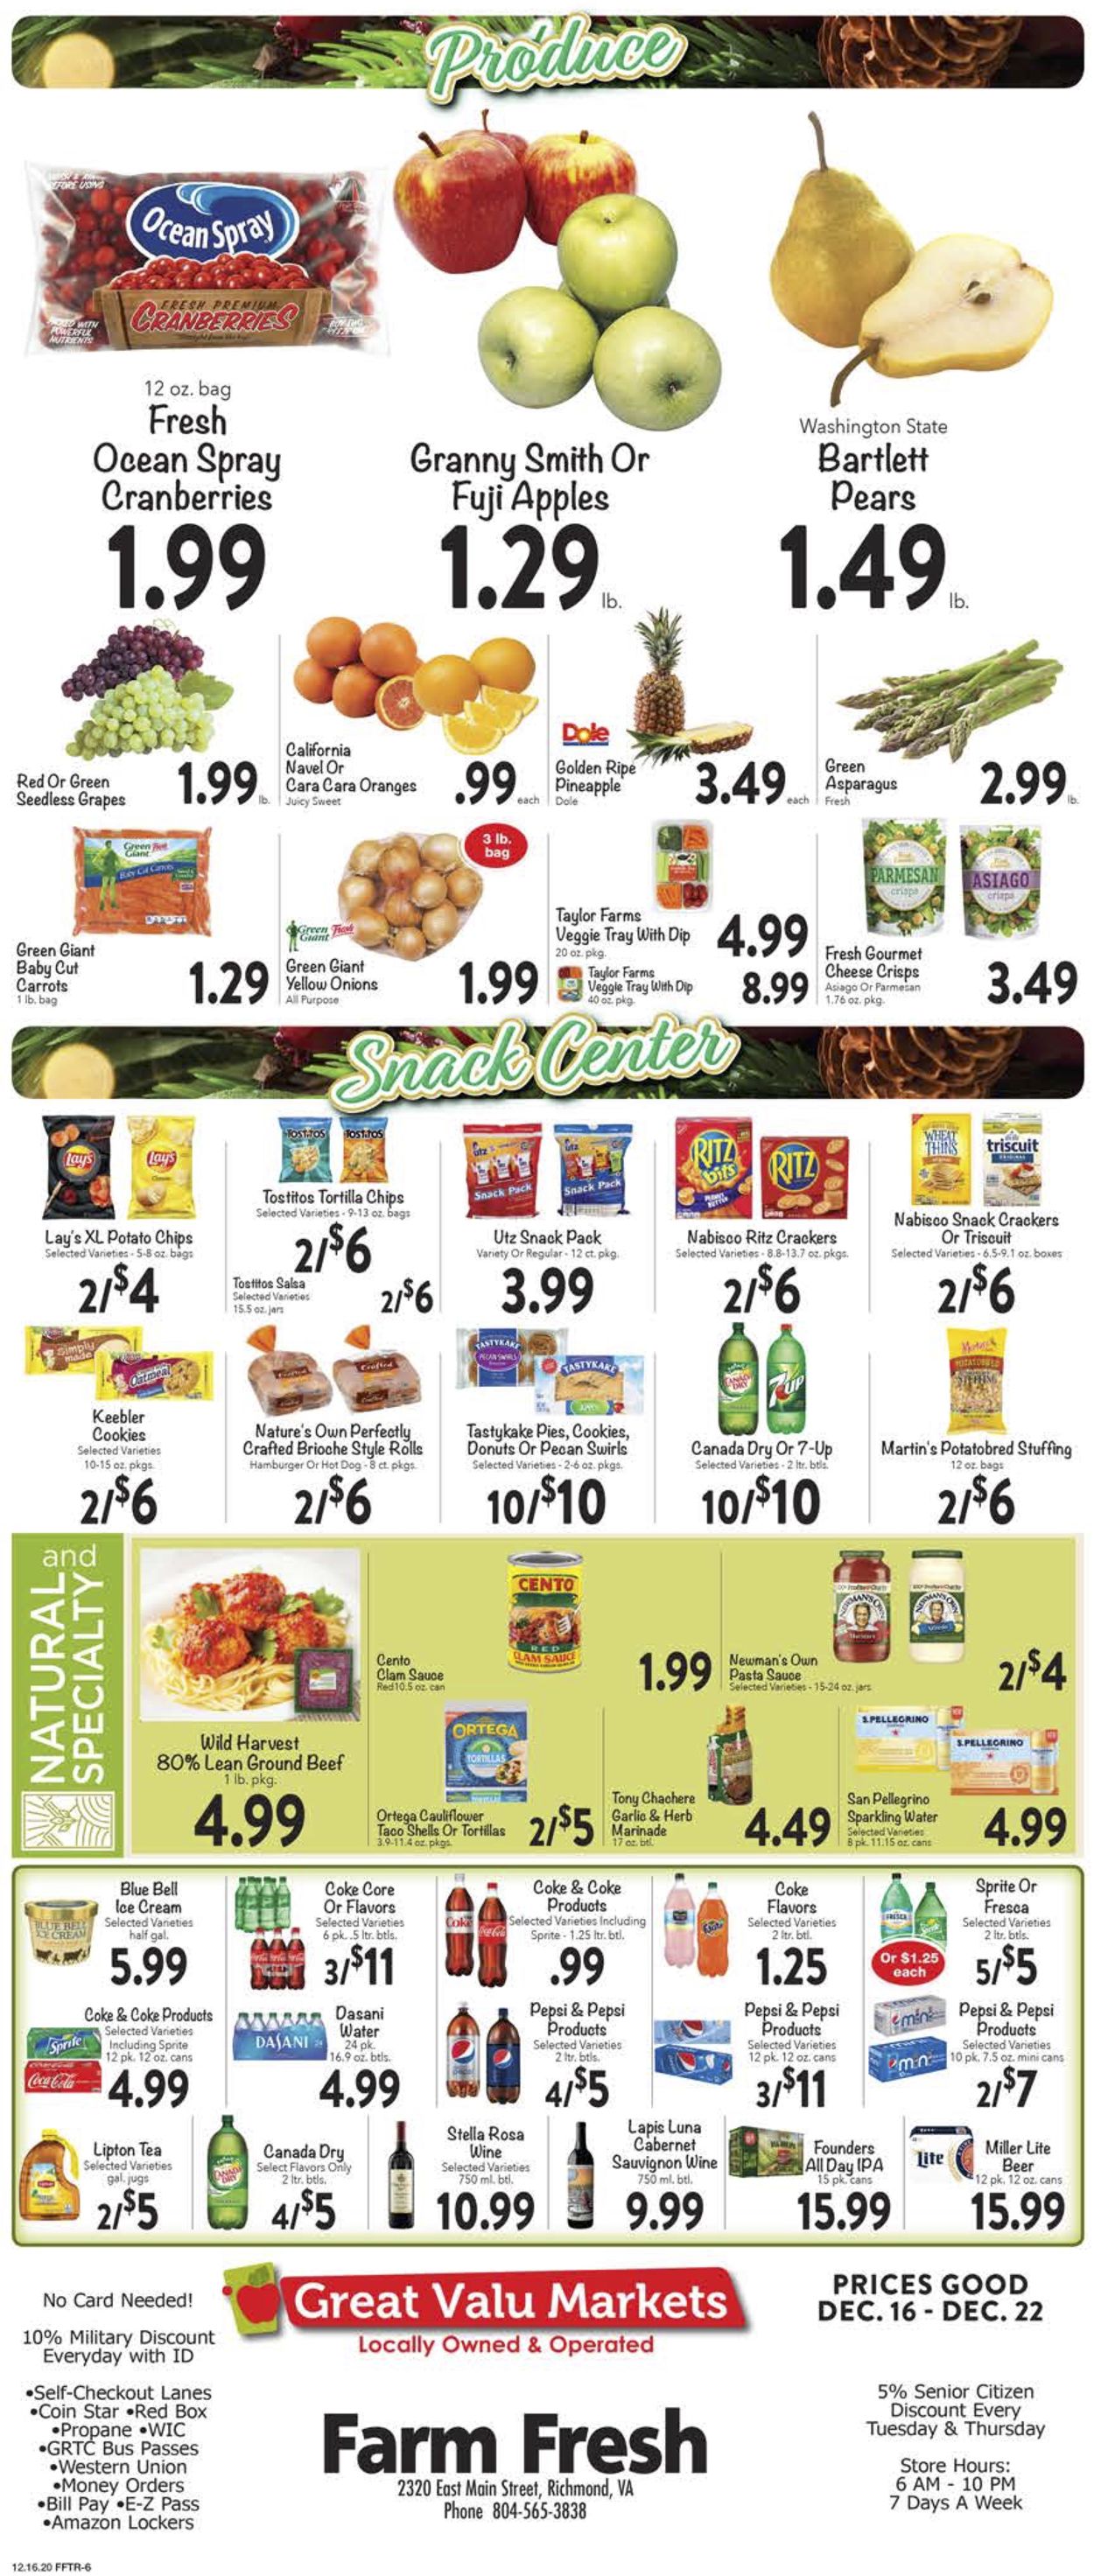 Farm Fresh Current weekly ad 12/16 - 12/22/2020 [6] - frequent-ads.com